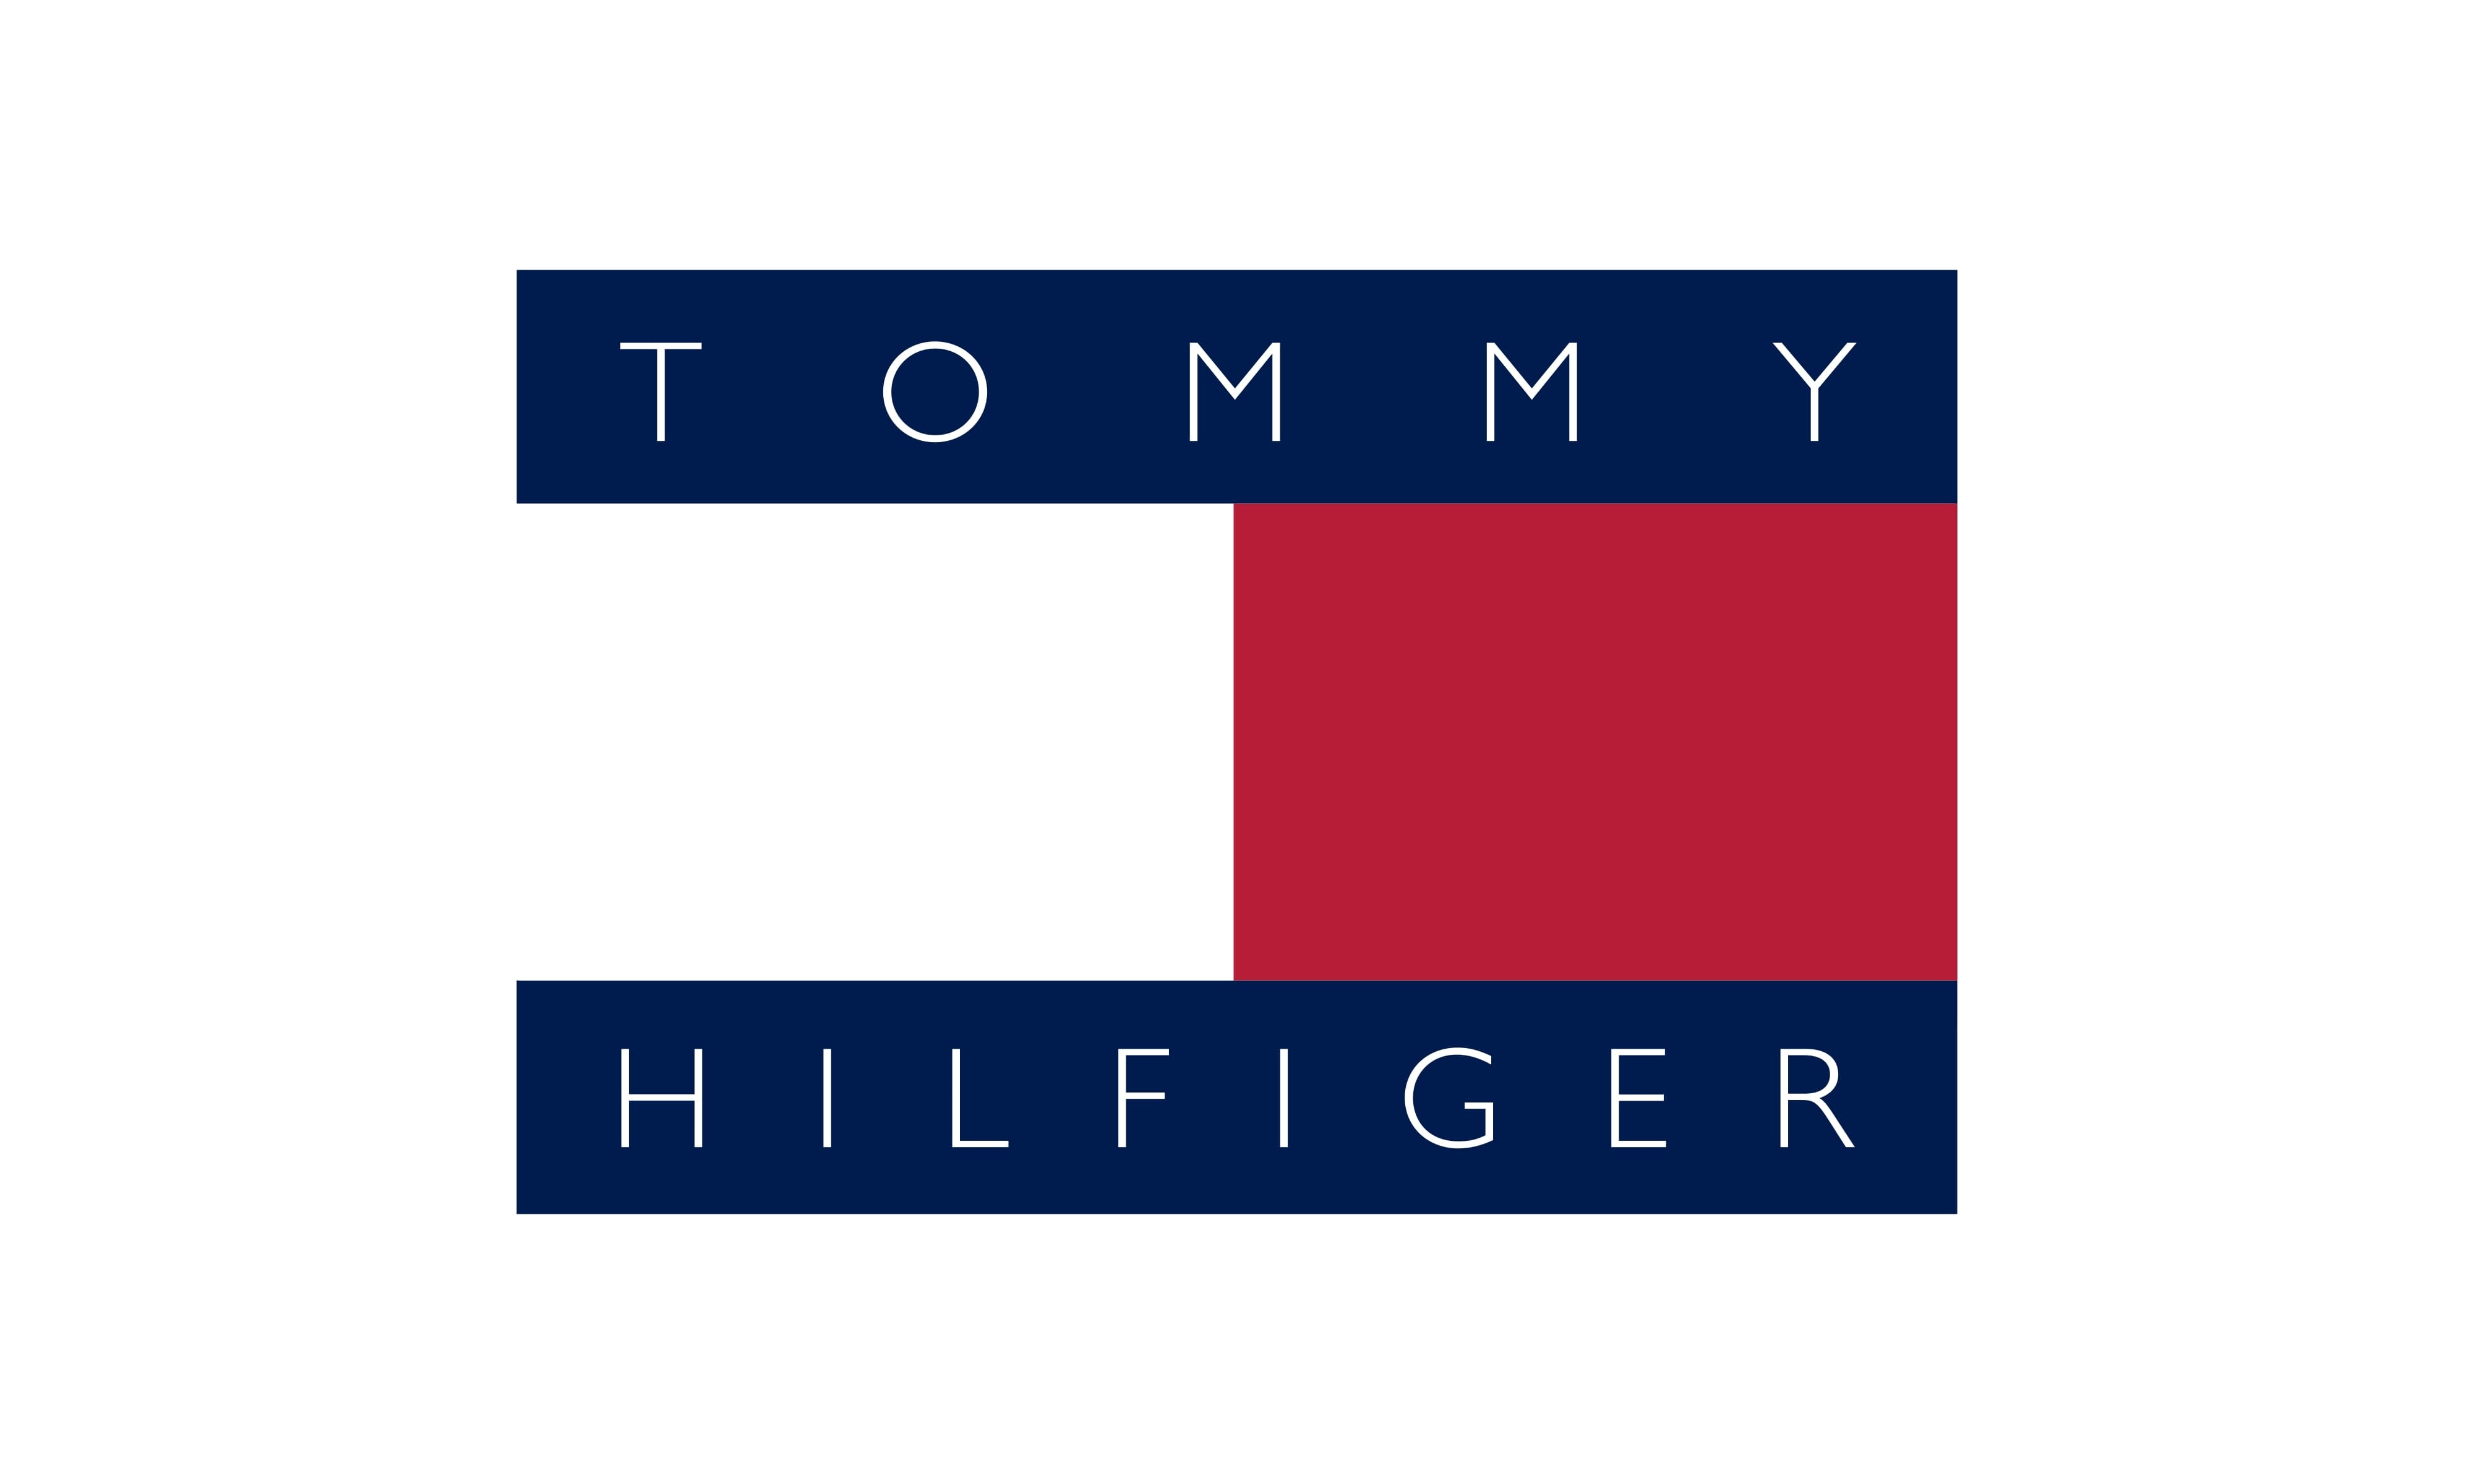 Tommy Hilfiger logo and symbol, meaning 